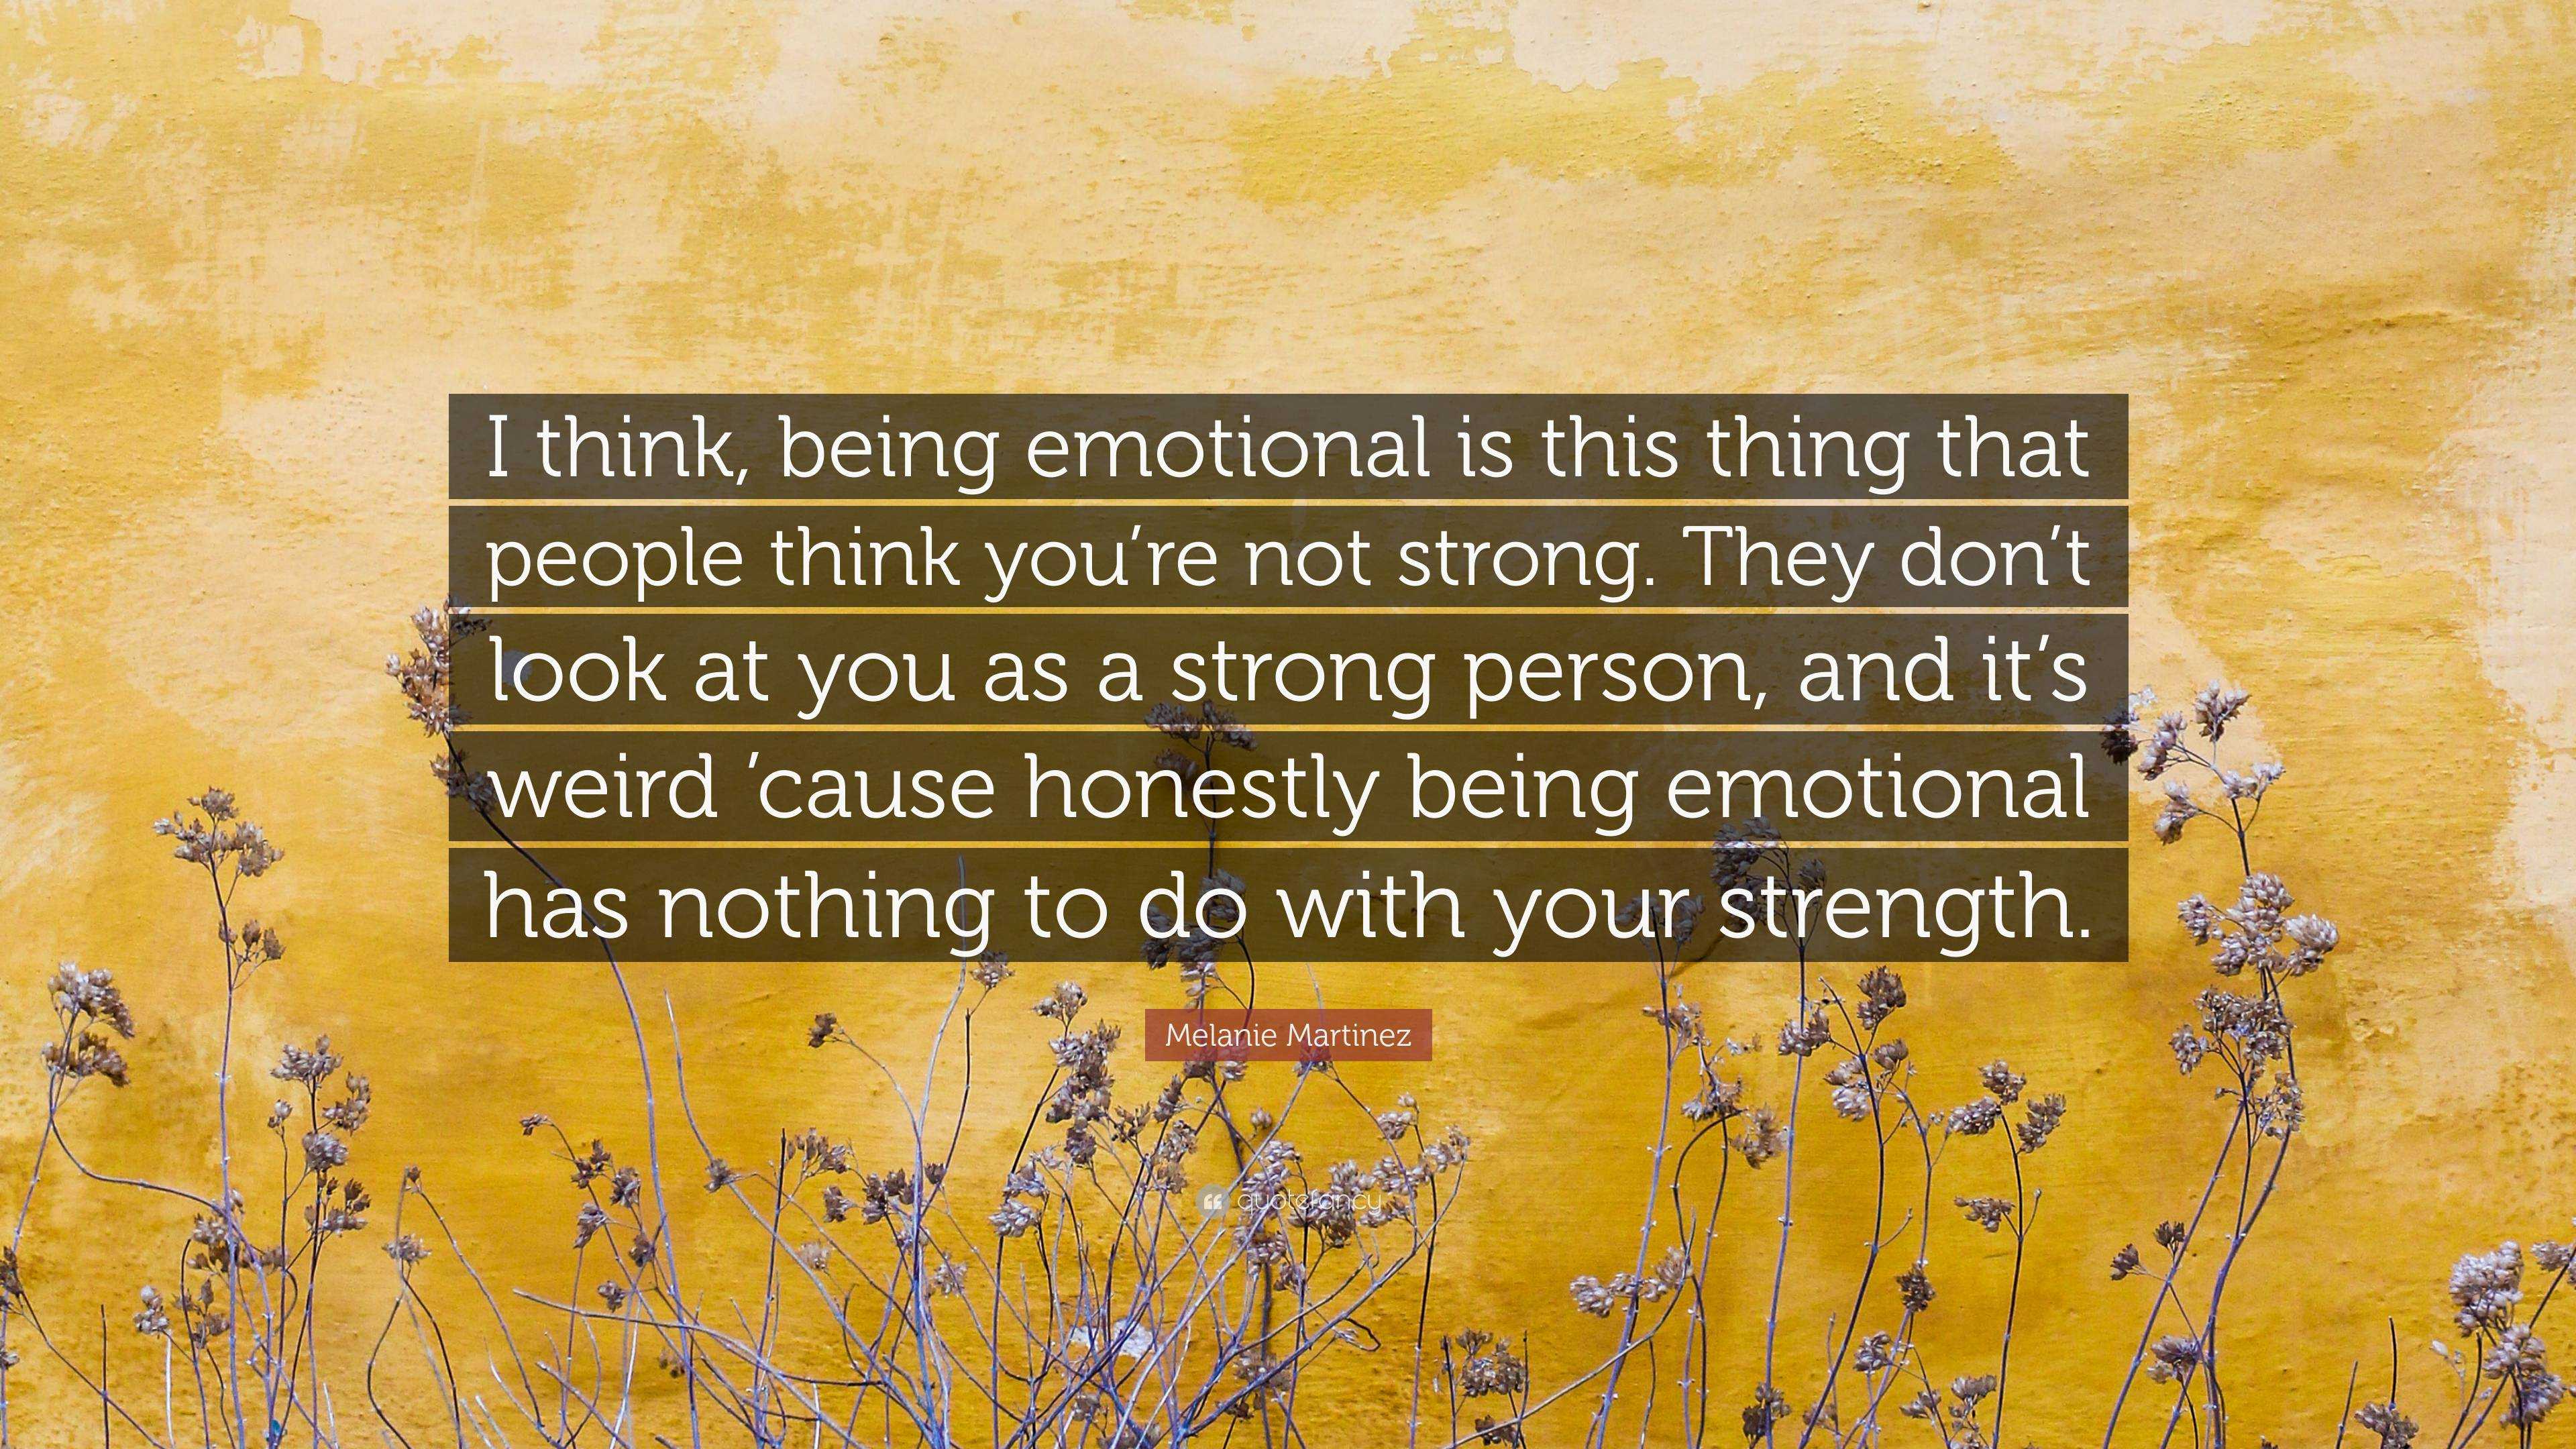 Melanie Martinez Quote: “I think, being emotional is this thing that ...